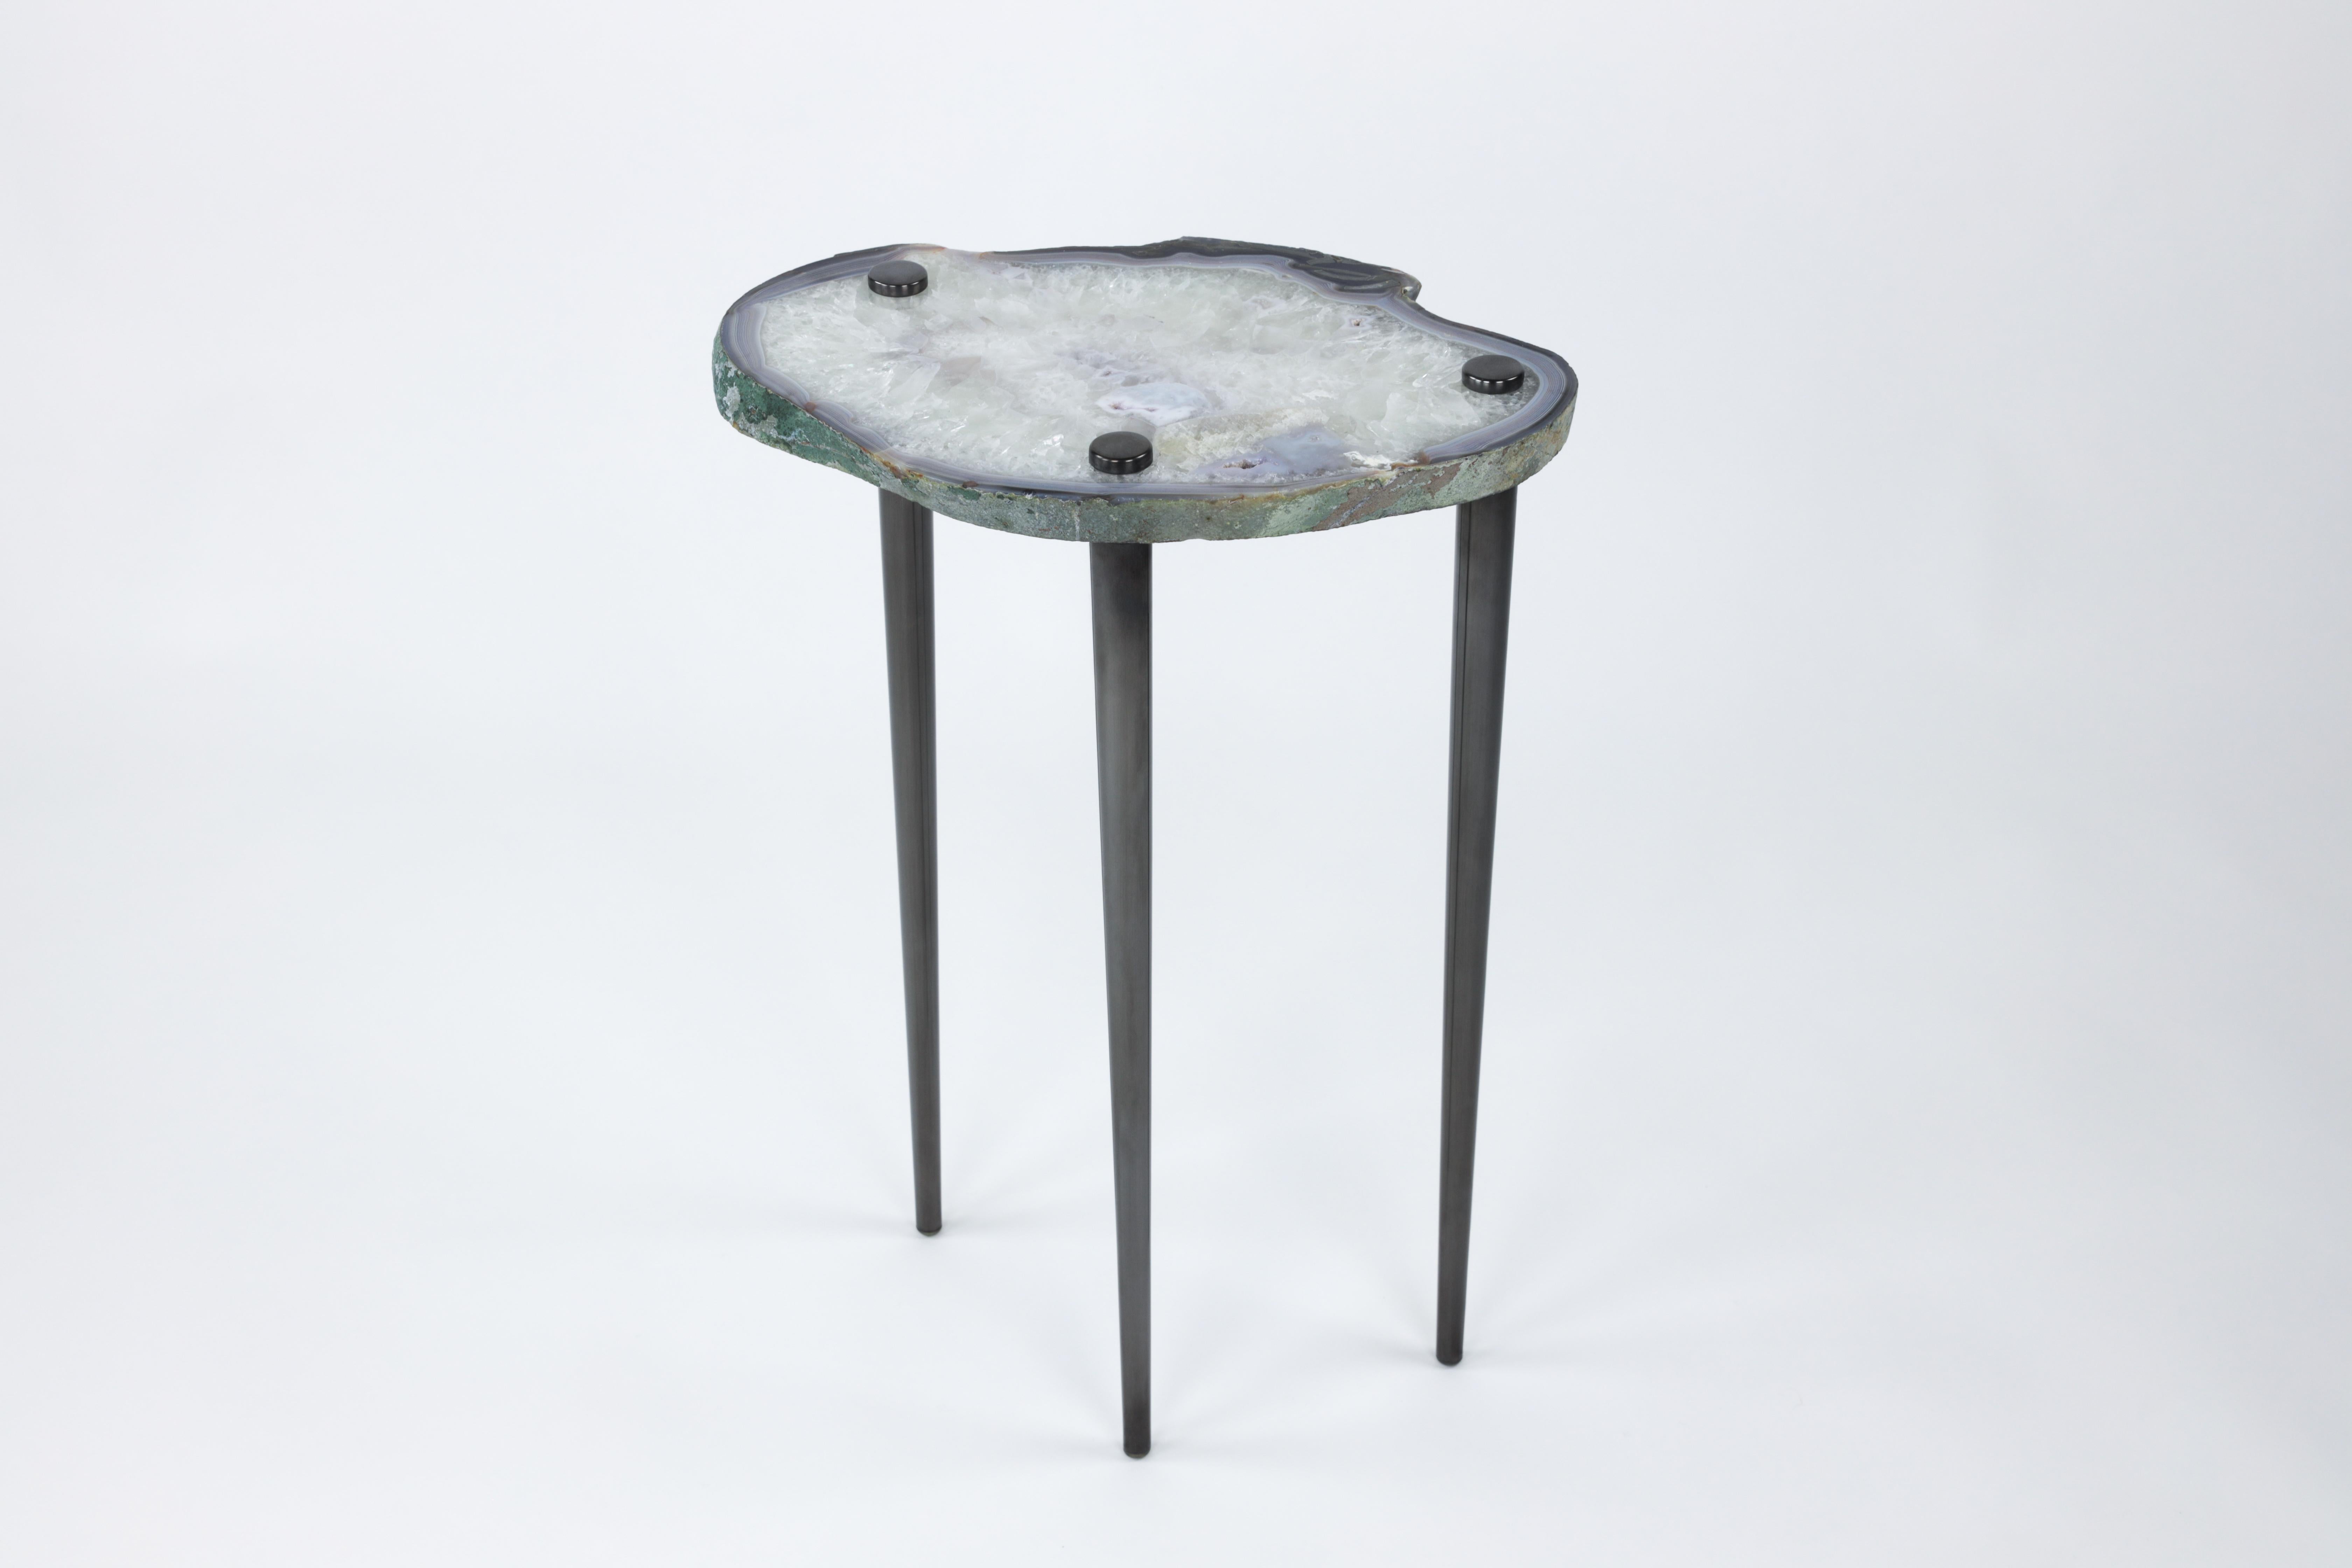 Patinated Pair of Powers of 10 Tables w/ solid brass legs by Christopher Kreiling